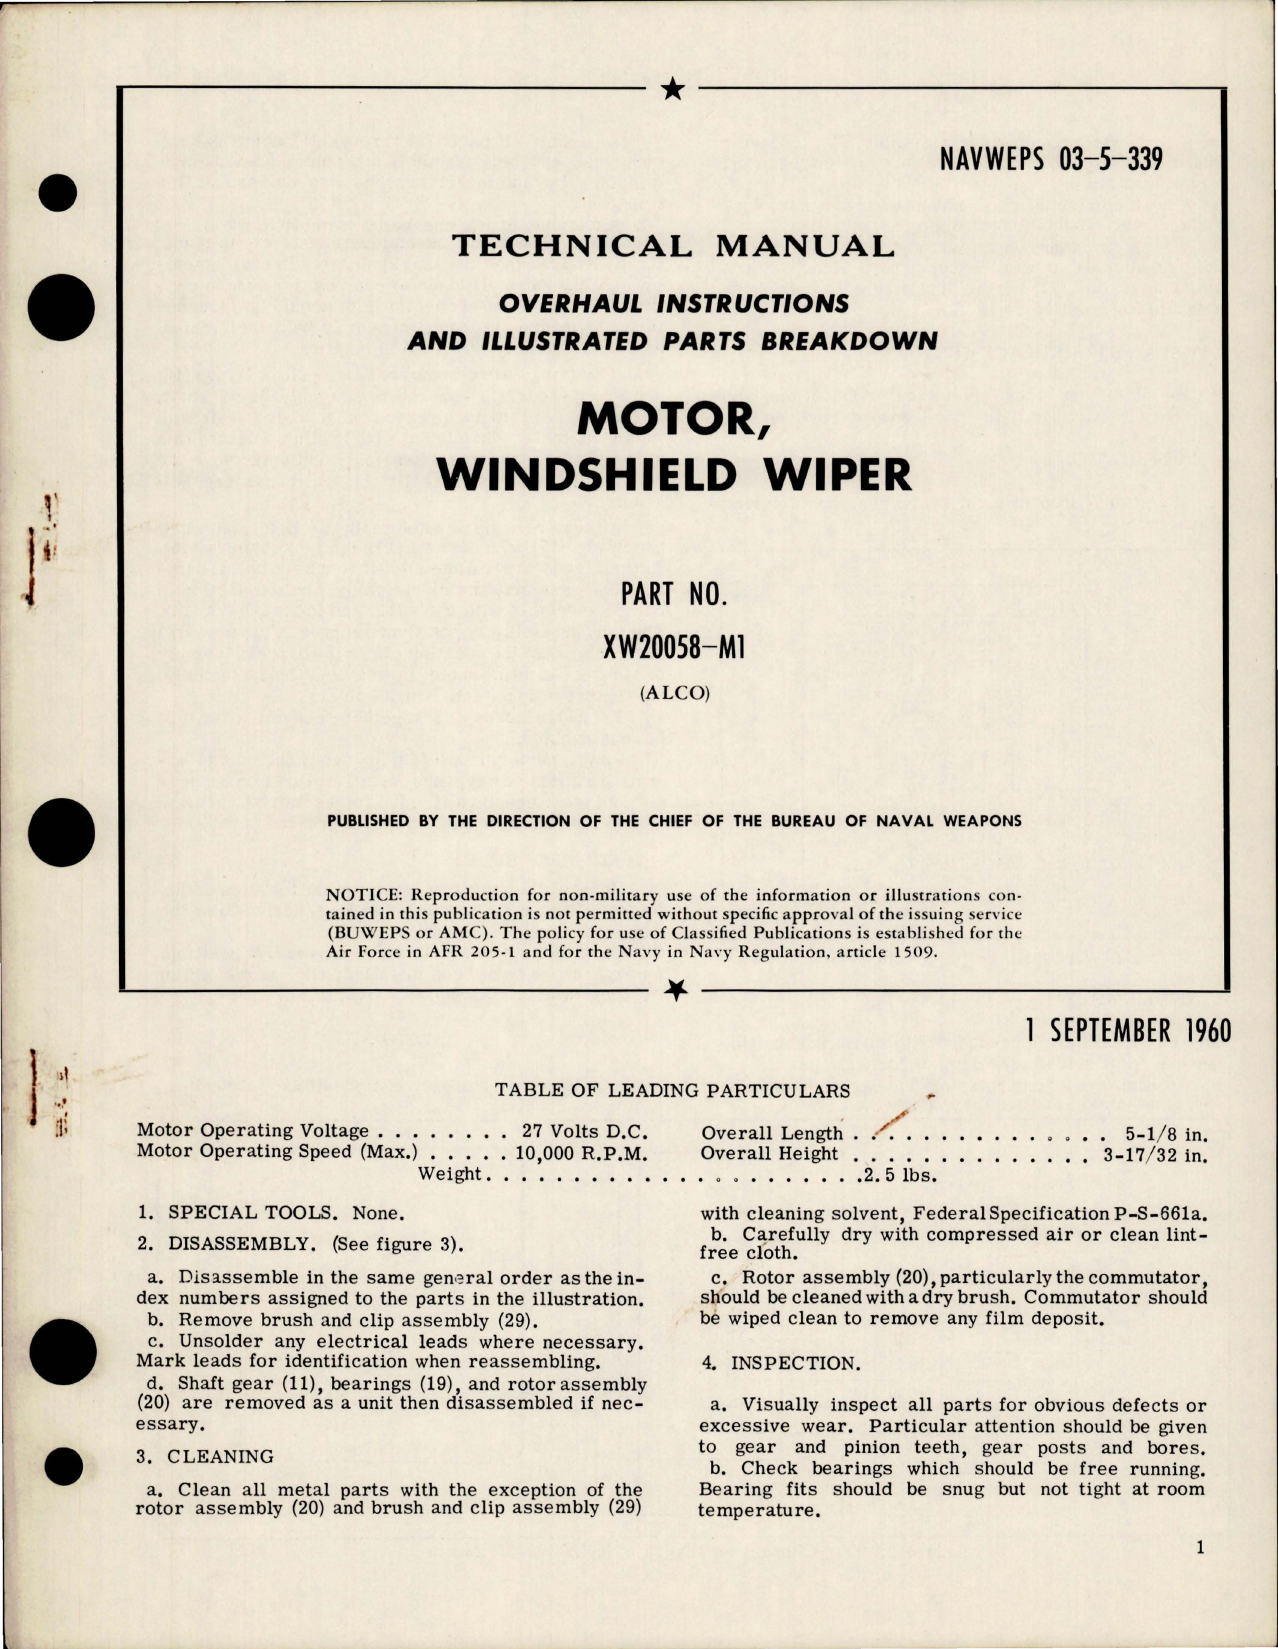 Sample page 1 from AirCorps Library document: Overhaul Instructions with Illustrated Parts Breakdown for Windshield Wiper Motor - Part XW20058-M1 